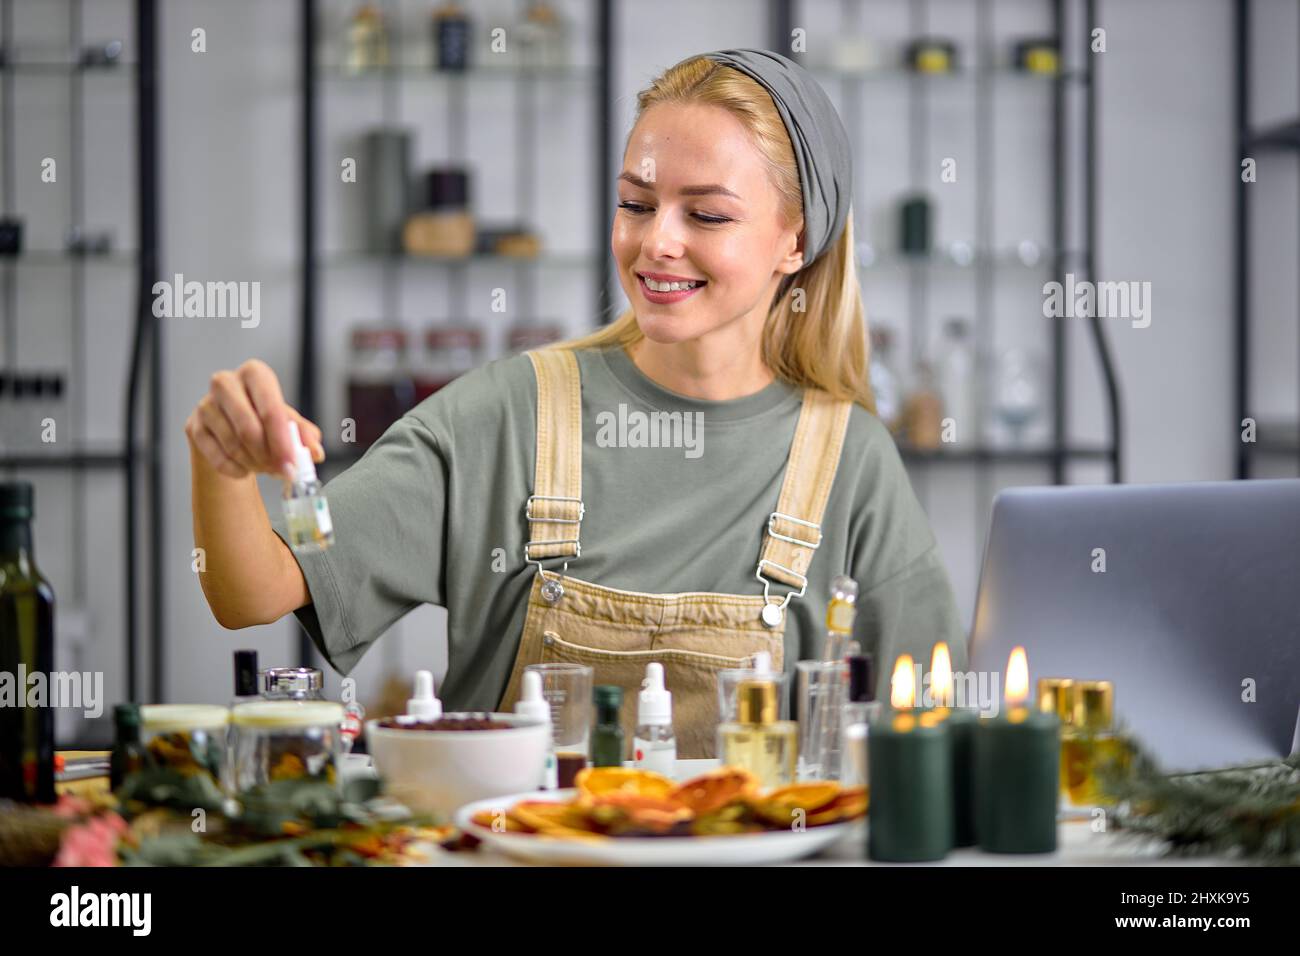 fragrance is tested and mixed scent by a professional perfumer before making another one. smiling attractive caucasian lady in apron uniform at work p Stock Photo